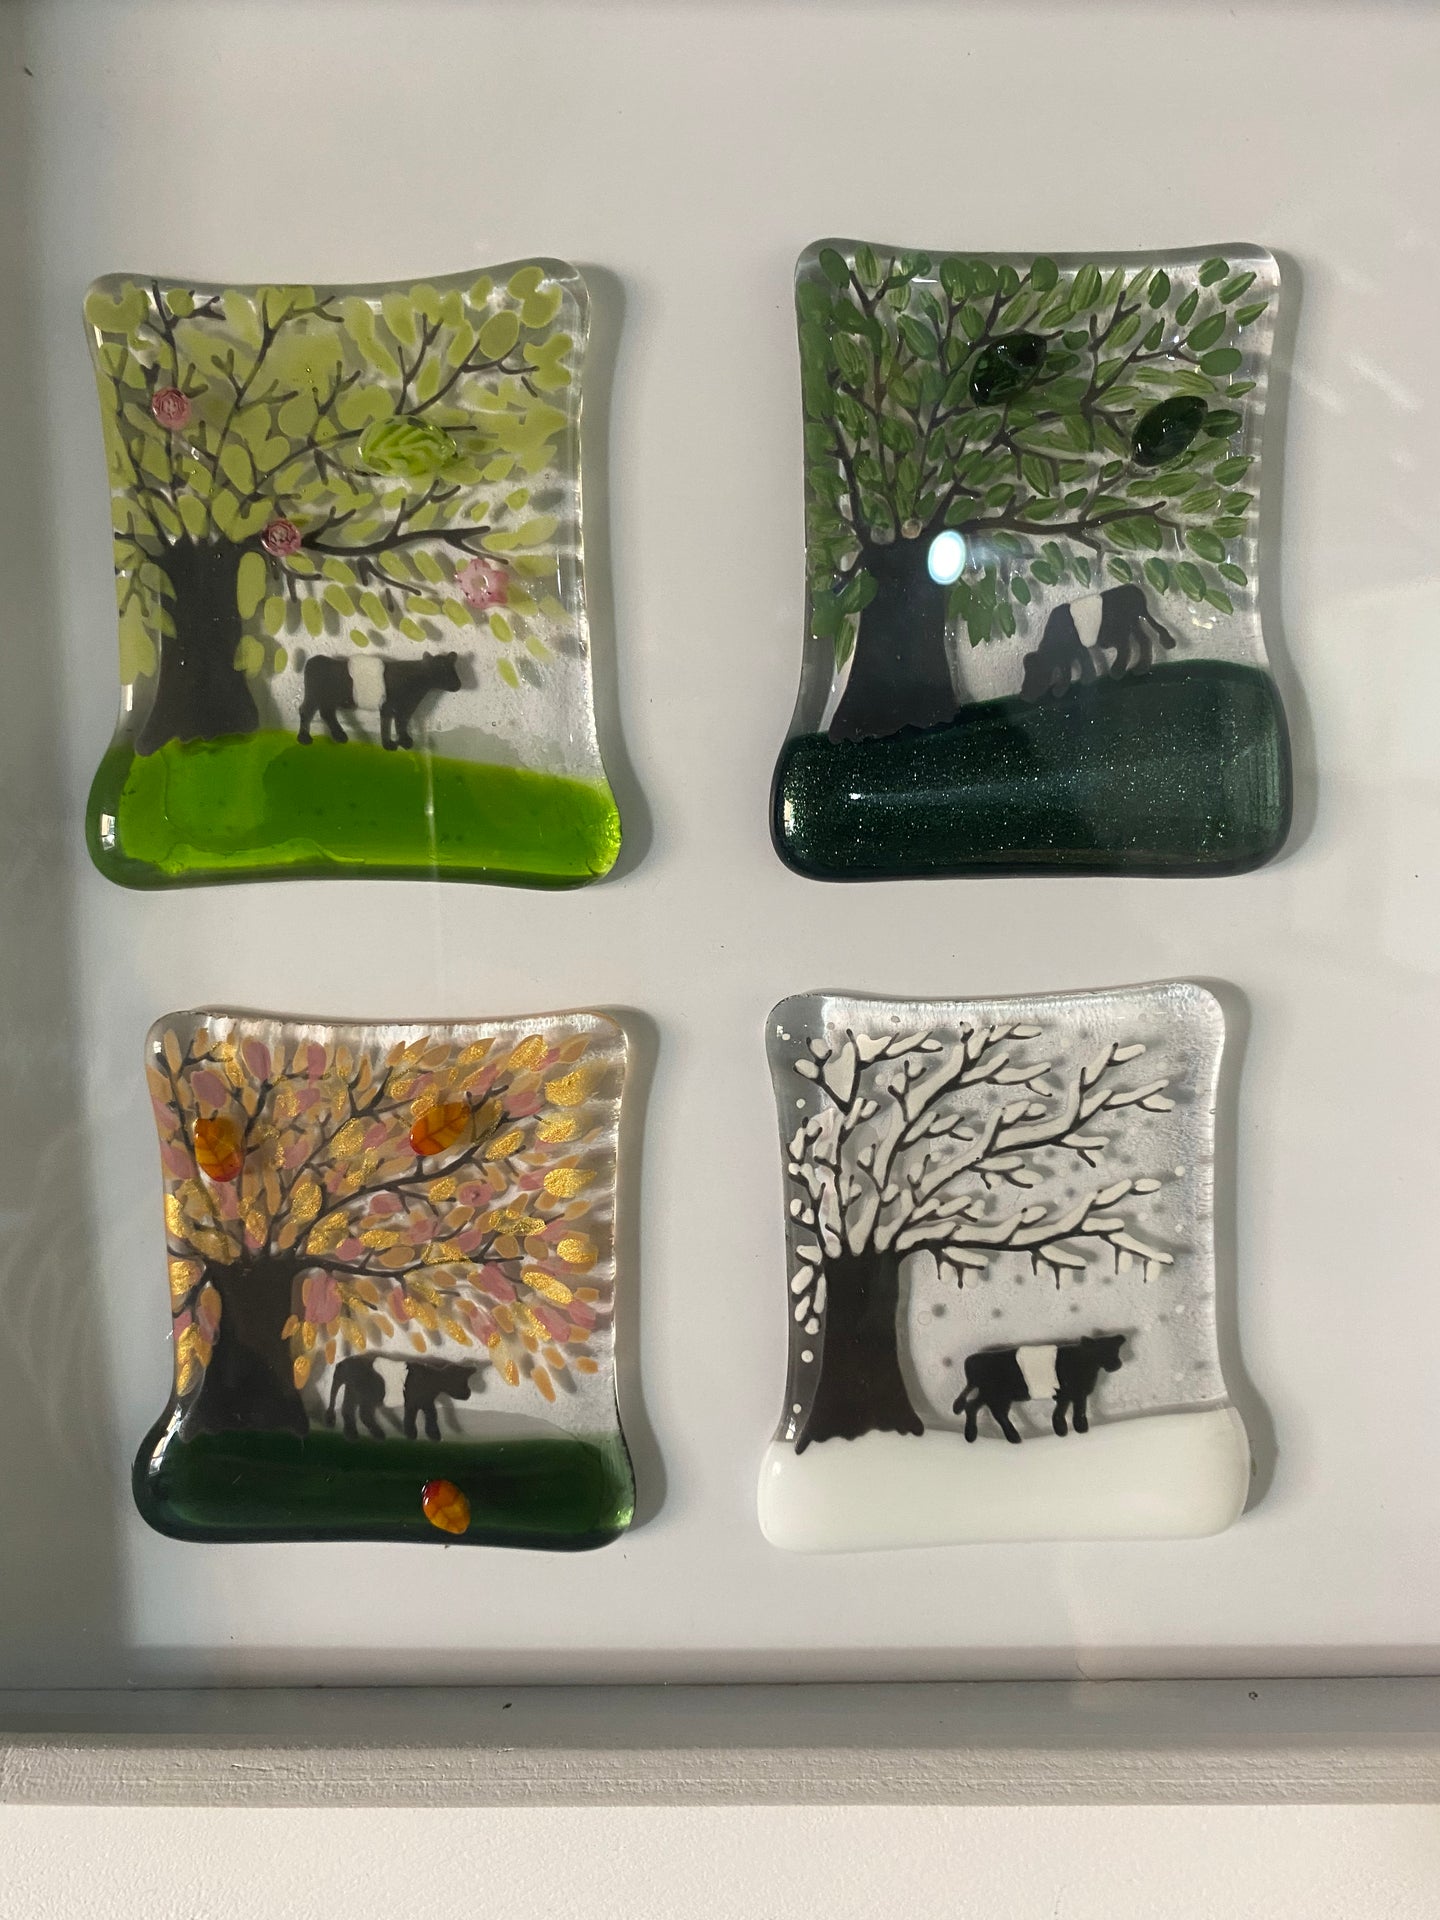 handmade fused glass box frame with four seasons belted Galloway cow detail 